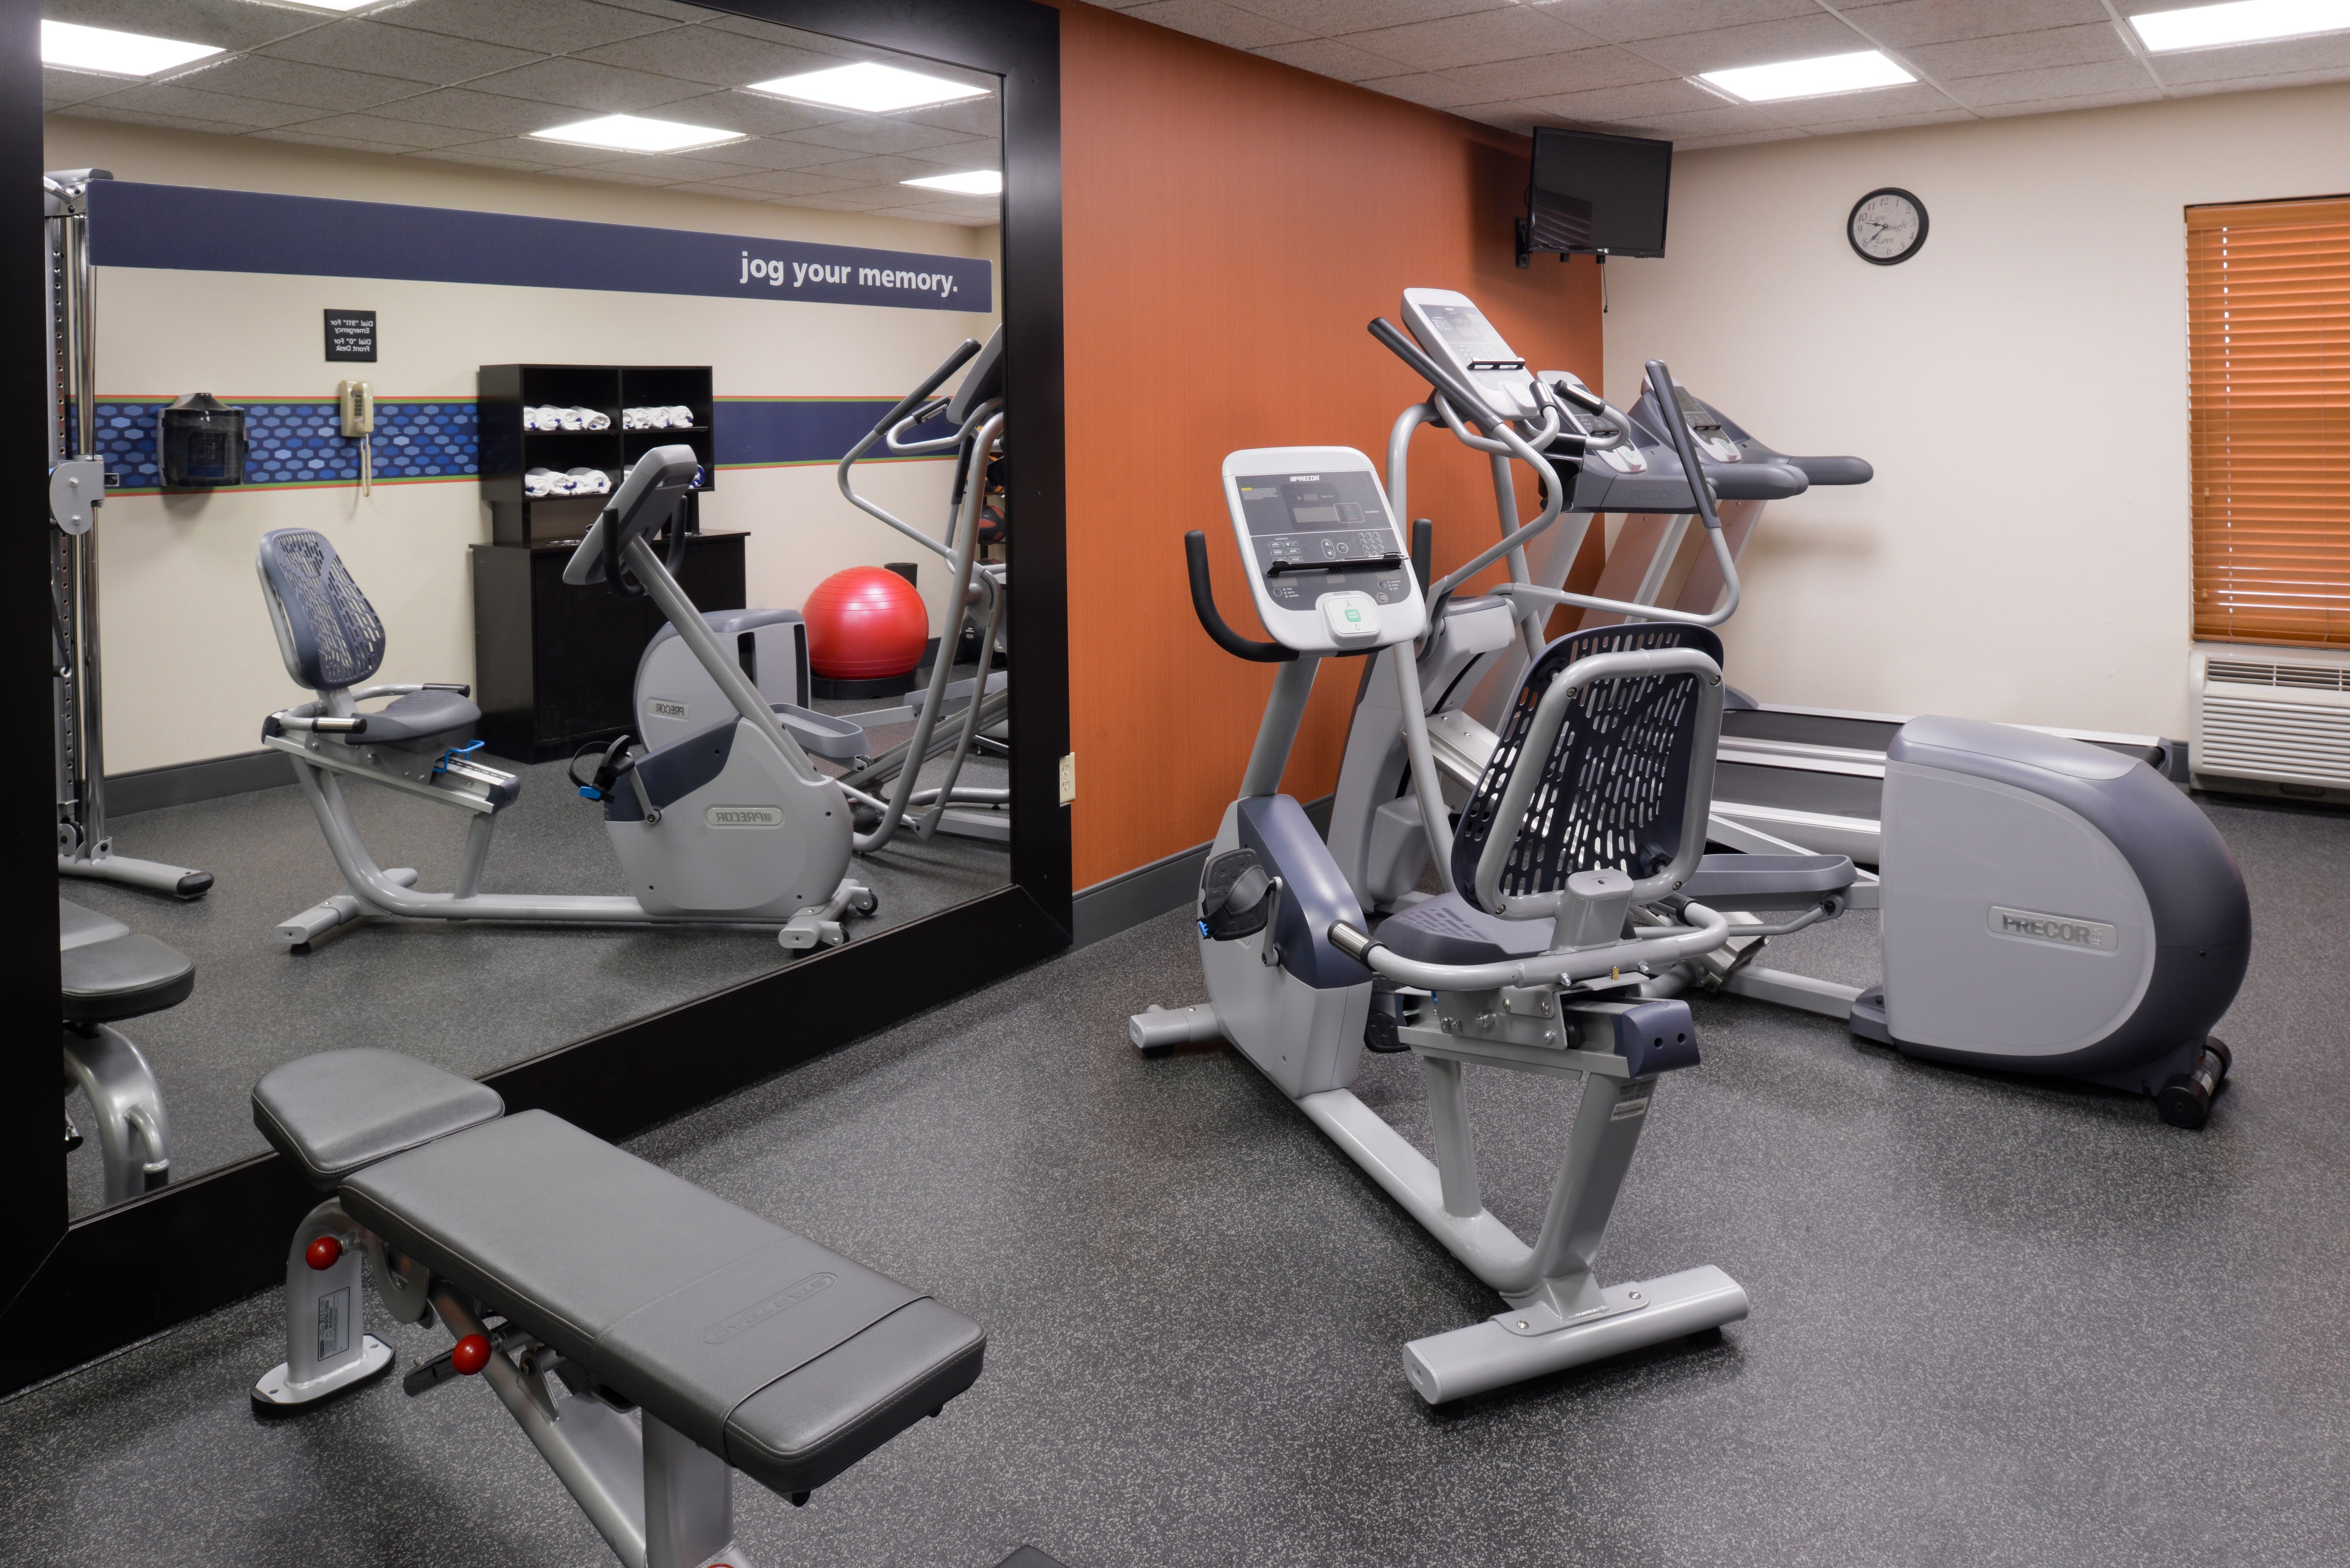 Cardio Equipment and Weight Bench in front of Mirror